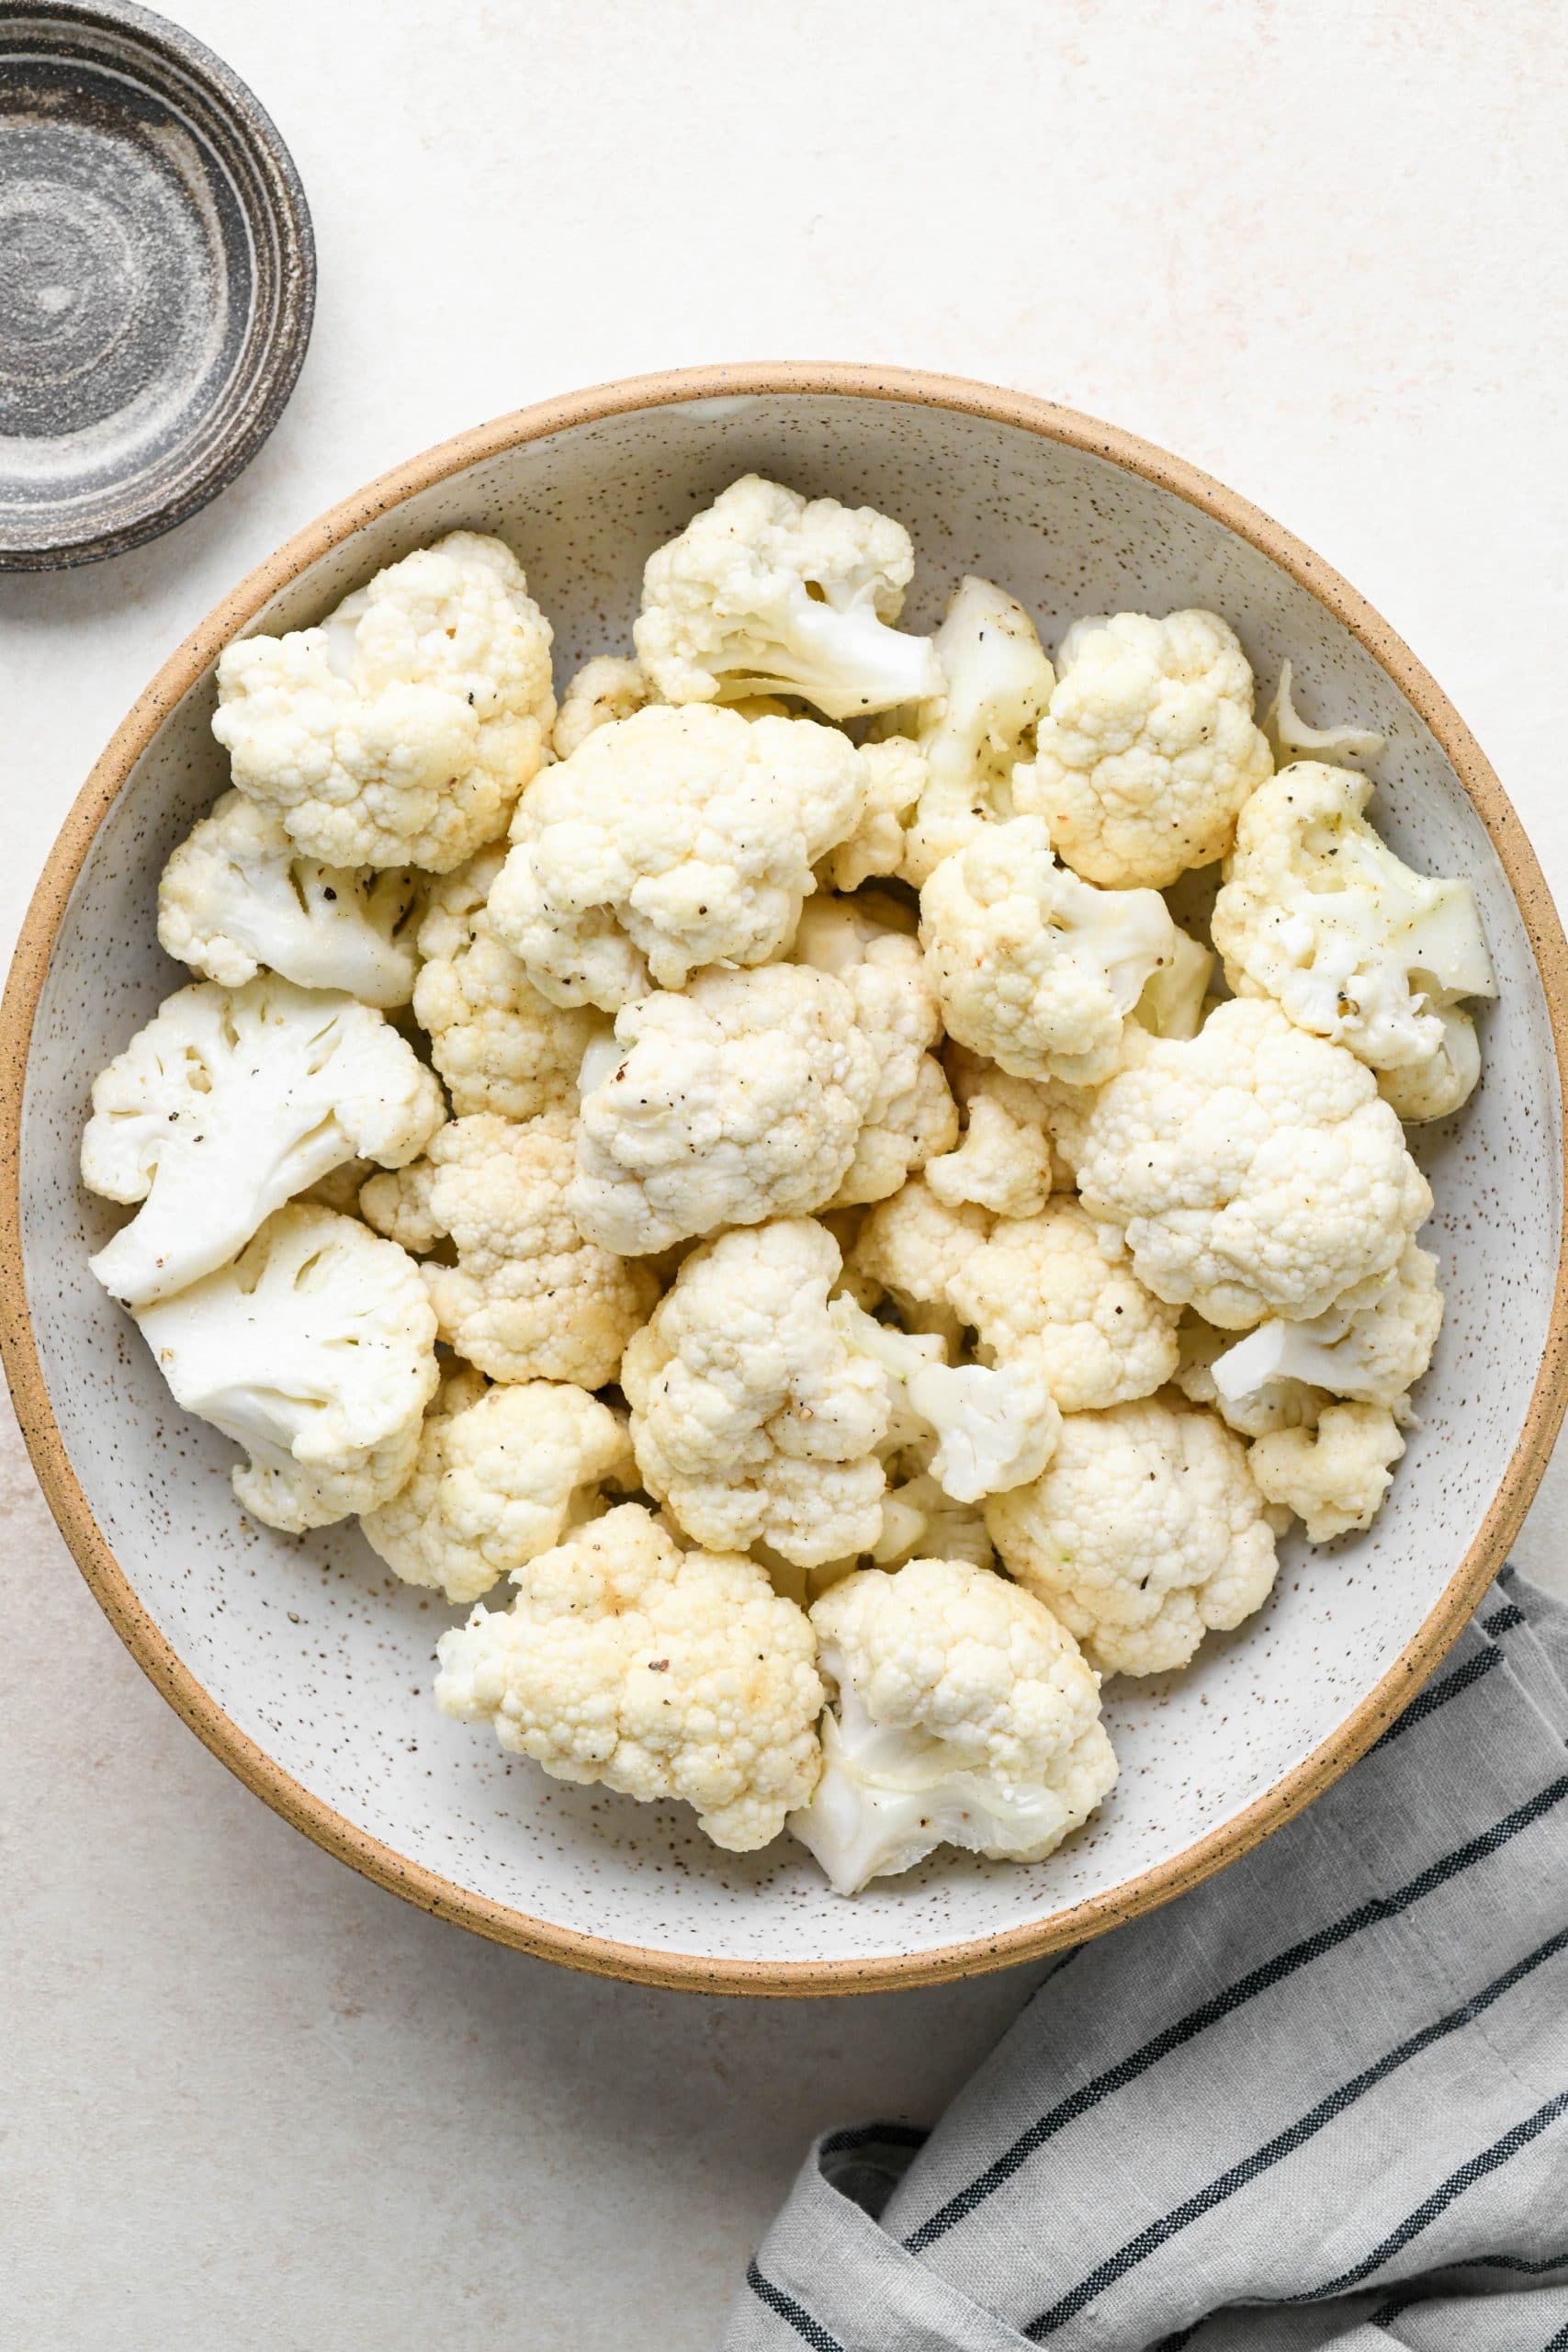 How to make buffalo cauliflower: Raw cauliflower florets in a bowl tossed with oil and spices.